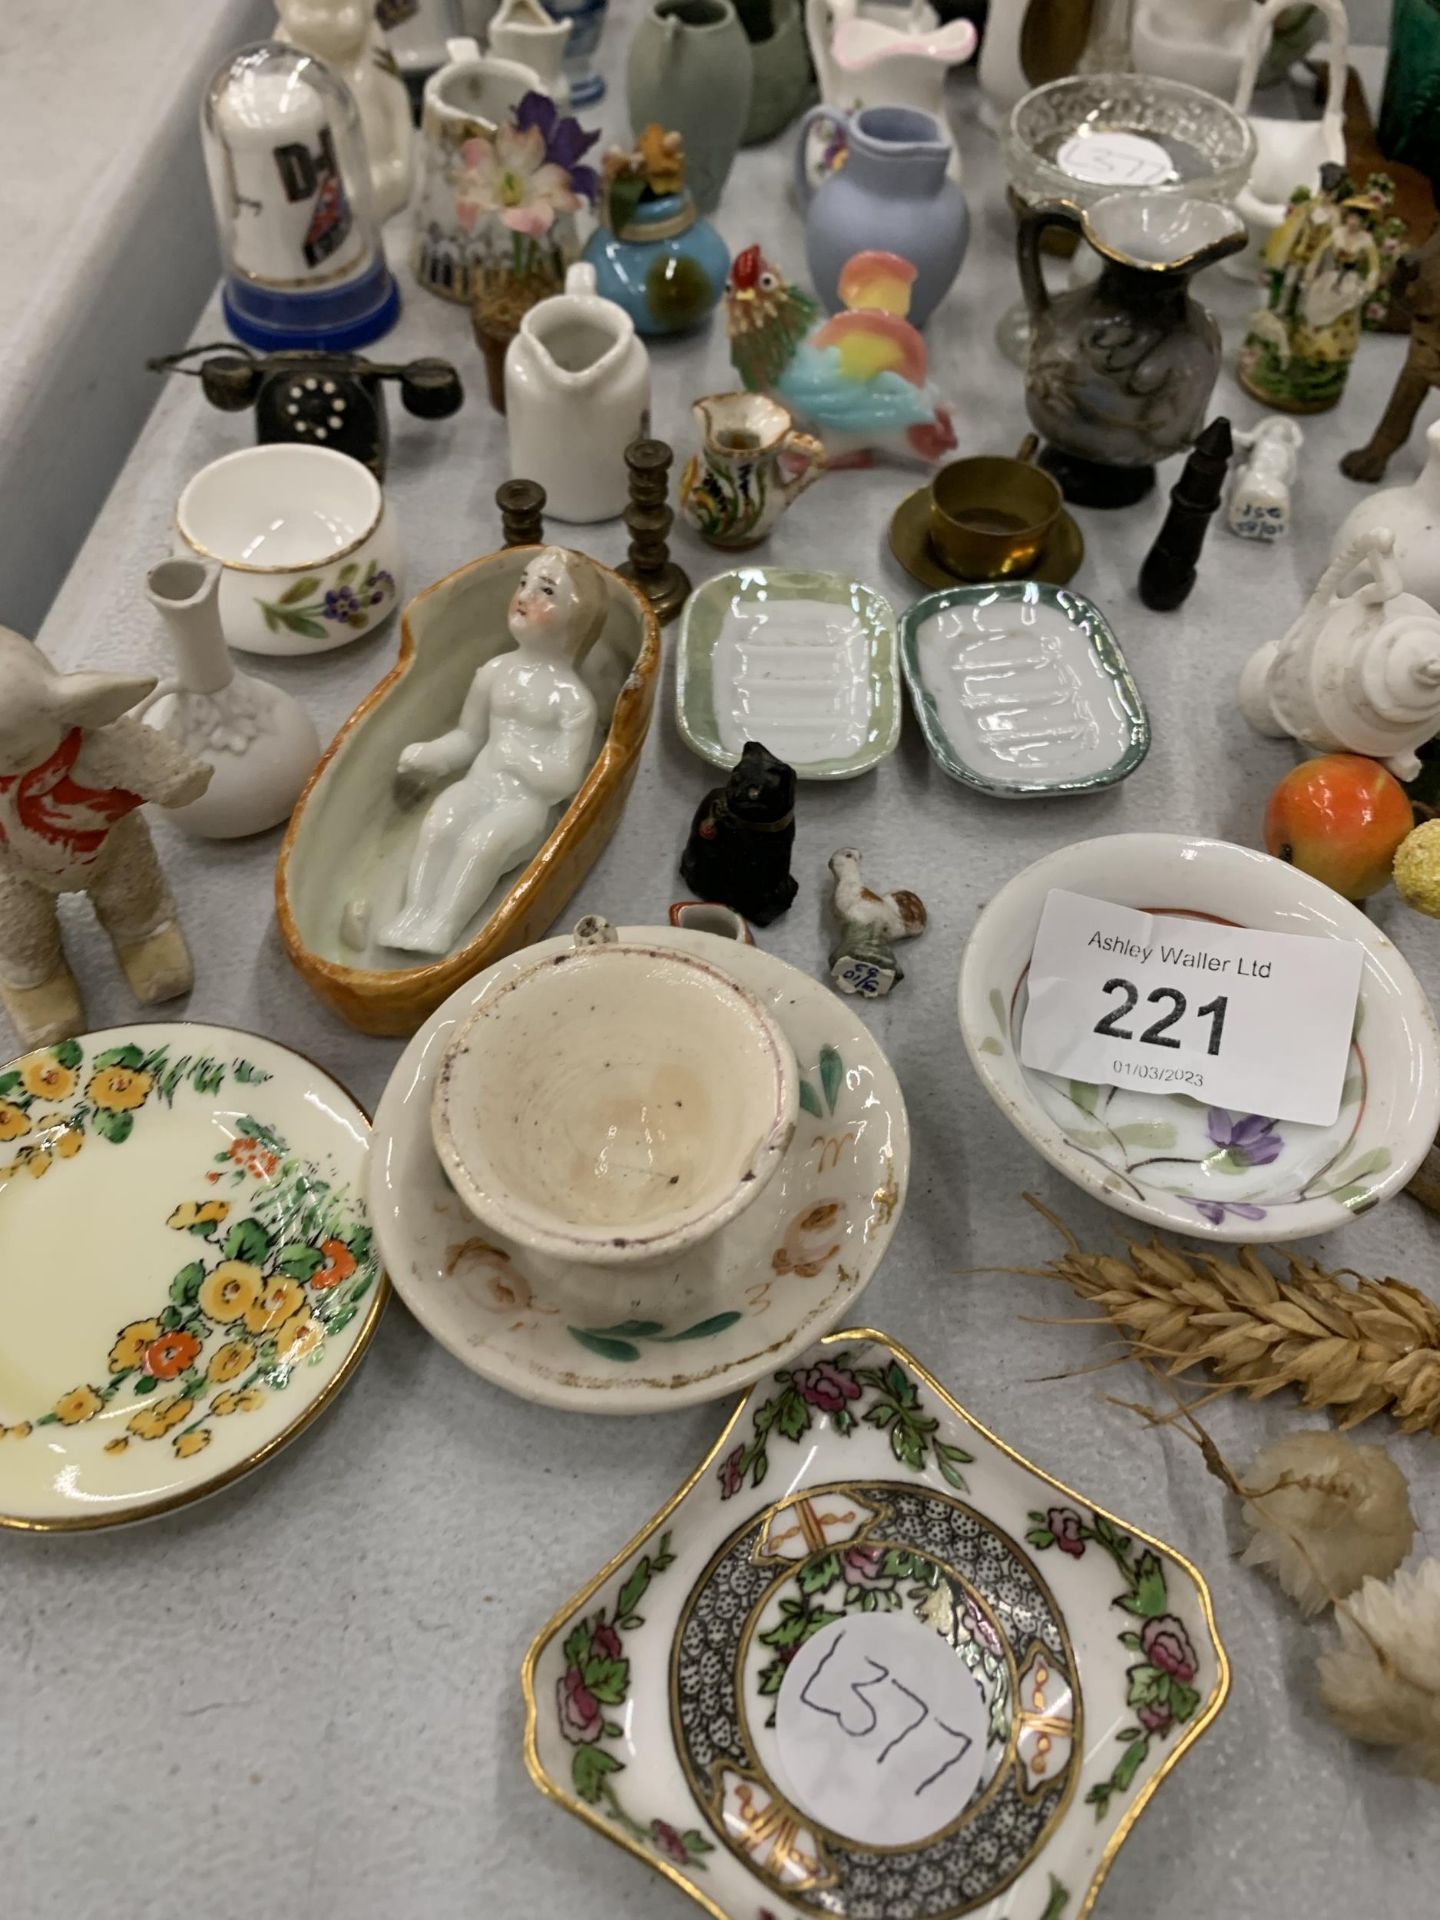 A LARGE QUANTITY OF MINIATURE ITEMS TO INCLUDE JUGS, POTS, ANIMALS, PLATES, ETC - Image 2 of 4